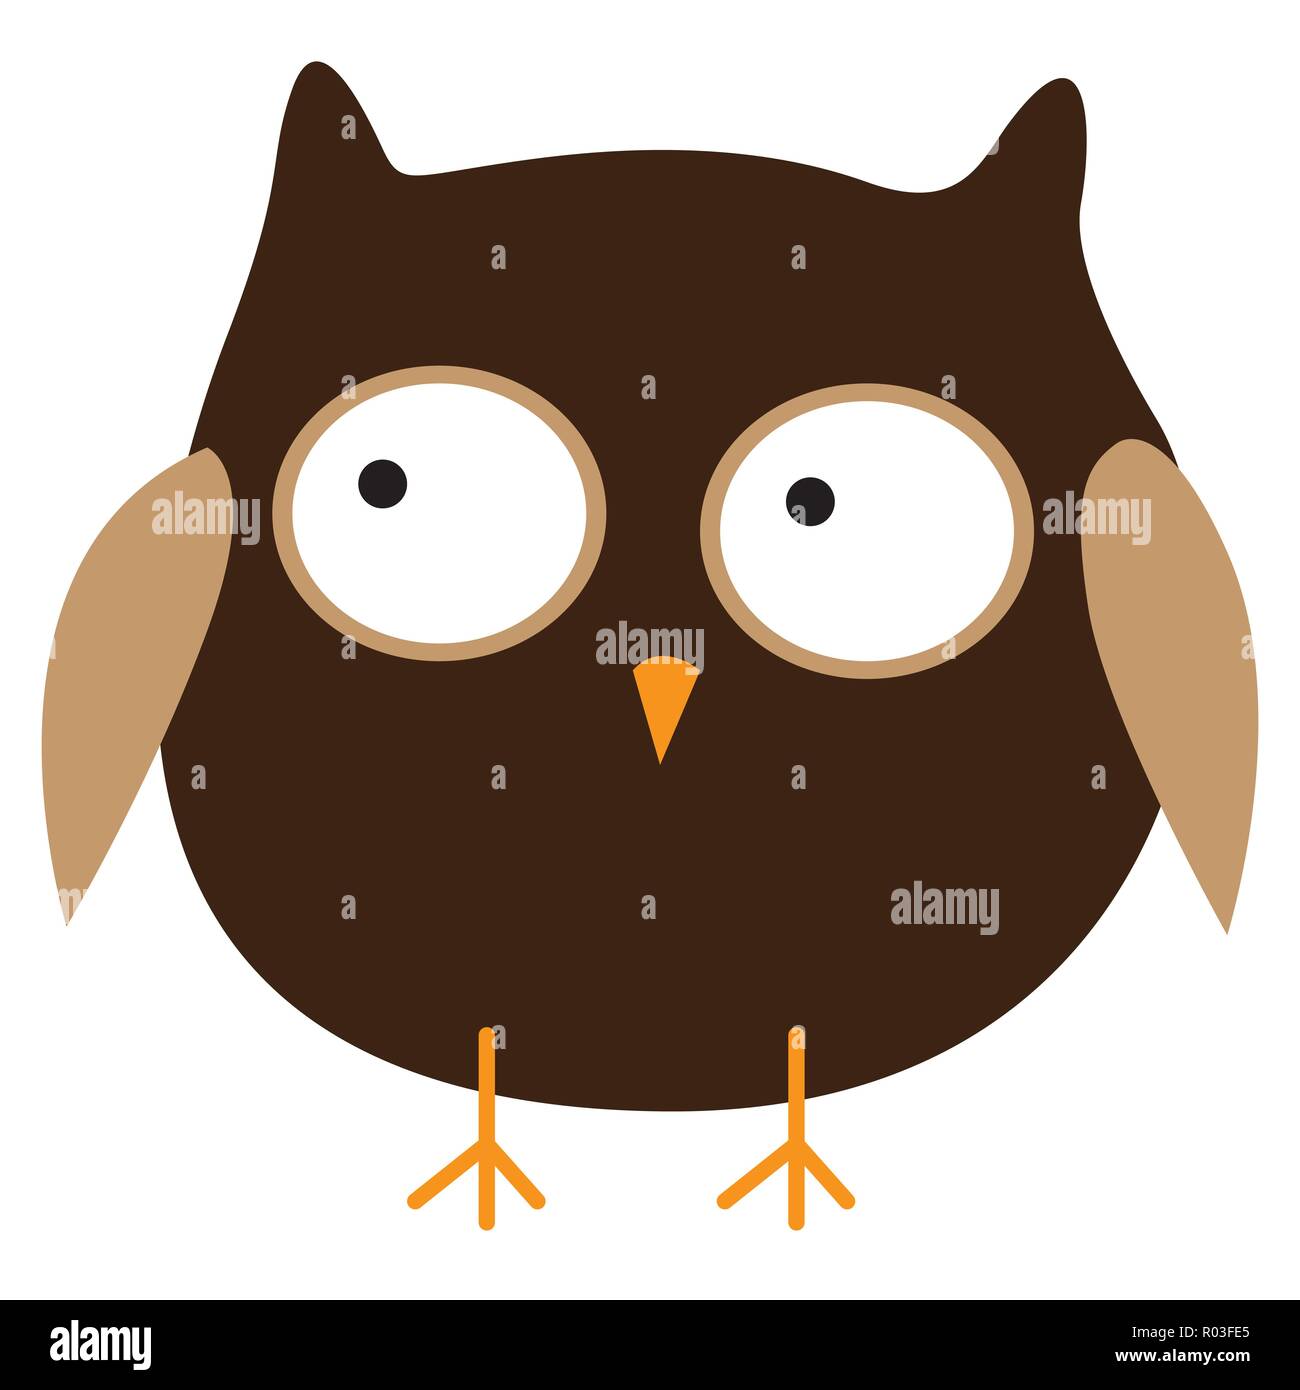 Crazy funny owl hand drawn Stock Vector